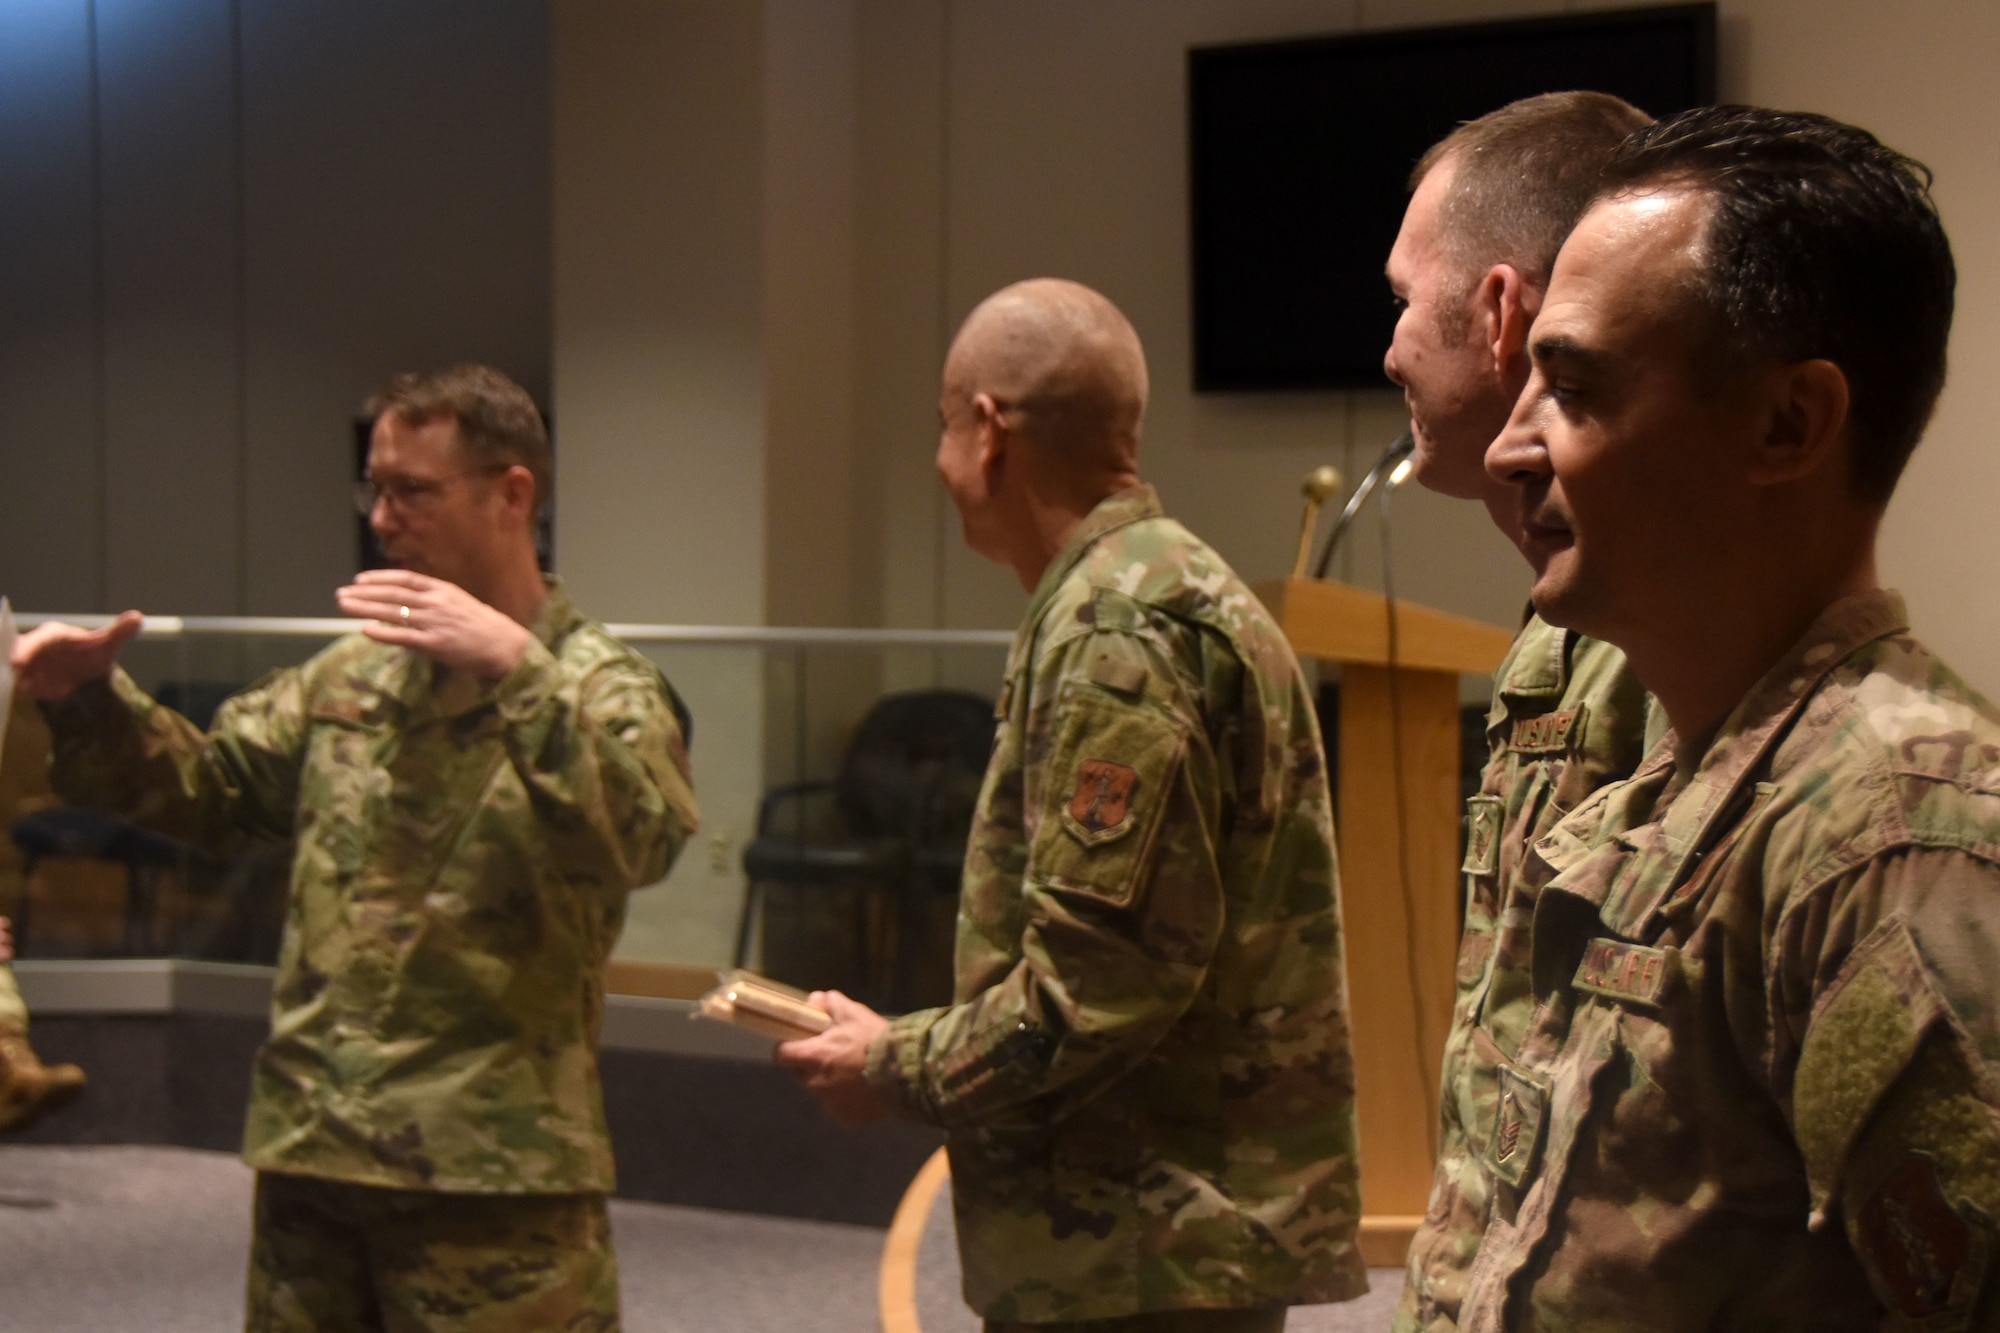 U.S. Air Force North Carolina Assistant Adjutant General for Air, Brig. Gen. Stephen Mallette (far left), and State Command Chief Master Sgt. David Rodriguez (left), commend Master Sgt. Daniel Judd (right) and Master Sgt. Kernice Locklear (far right), 263rd Combat Communications Squadron with awards during an all-call held at the New London, N.C. Air National Guard Base (NCANG) headquarters, Jan. 12, 2020. Members of the NCANG celebrated the accomplishments of Master Sgts. Judd and Locklear who attended the United States Marine Corps Staff Non-Commissioned Officer Academy last year in an effort to better understand the traditions and customs of a sister service. Since attending the academies, Judd and Locklear have implemented U.S. Marine Corps. practices such as sharing unit history and helping newer Airmen feel more involved with more responsibilities.